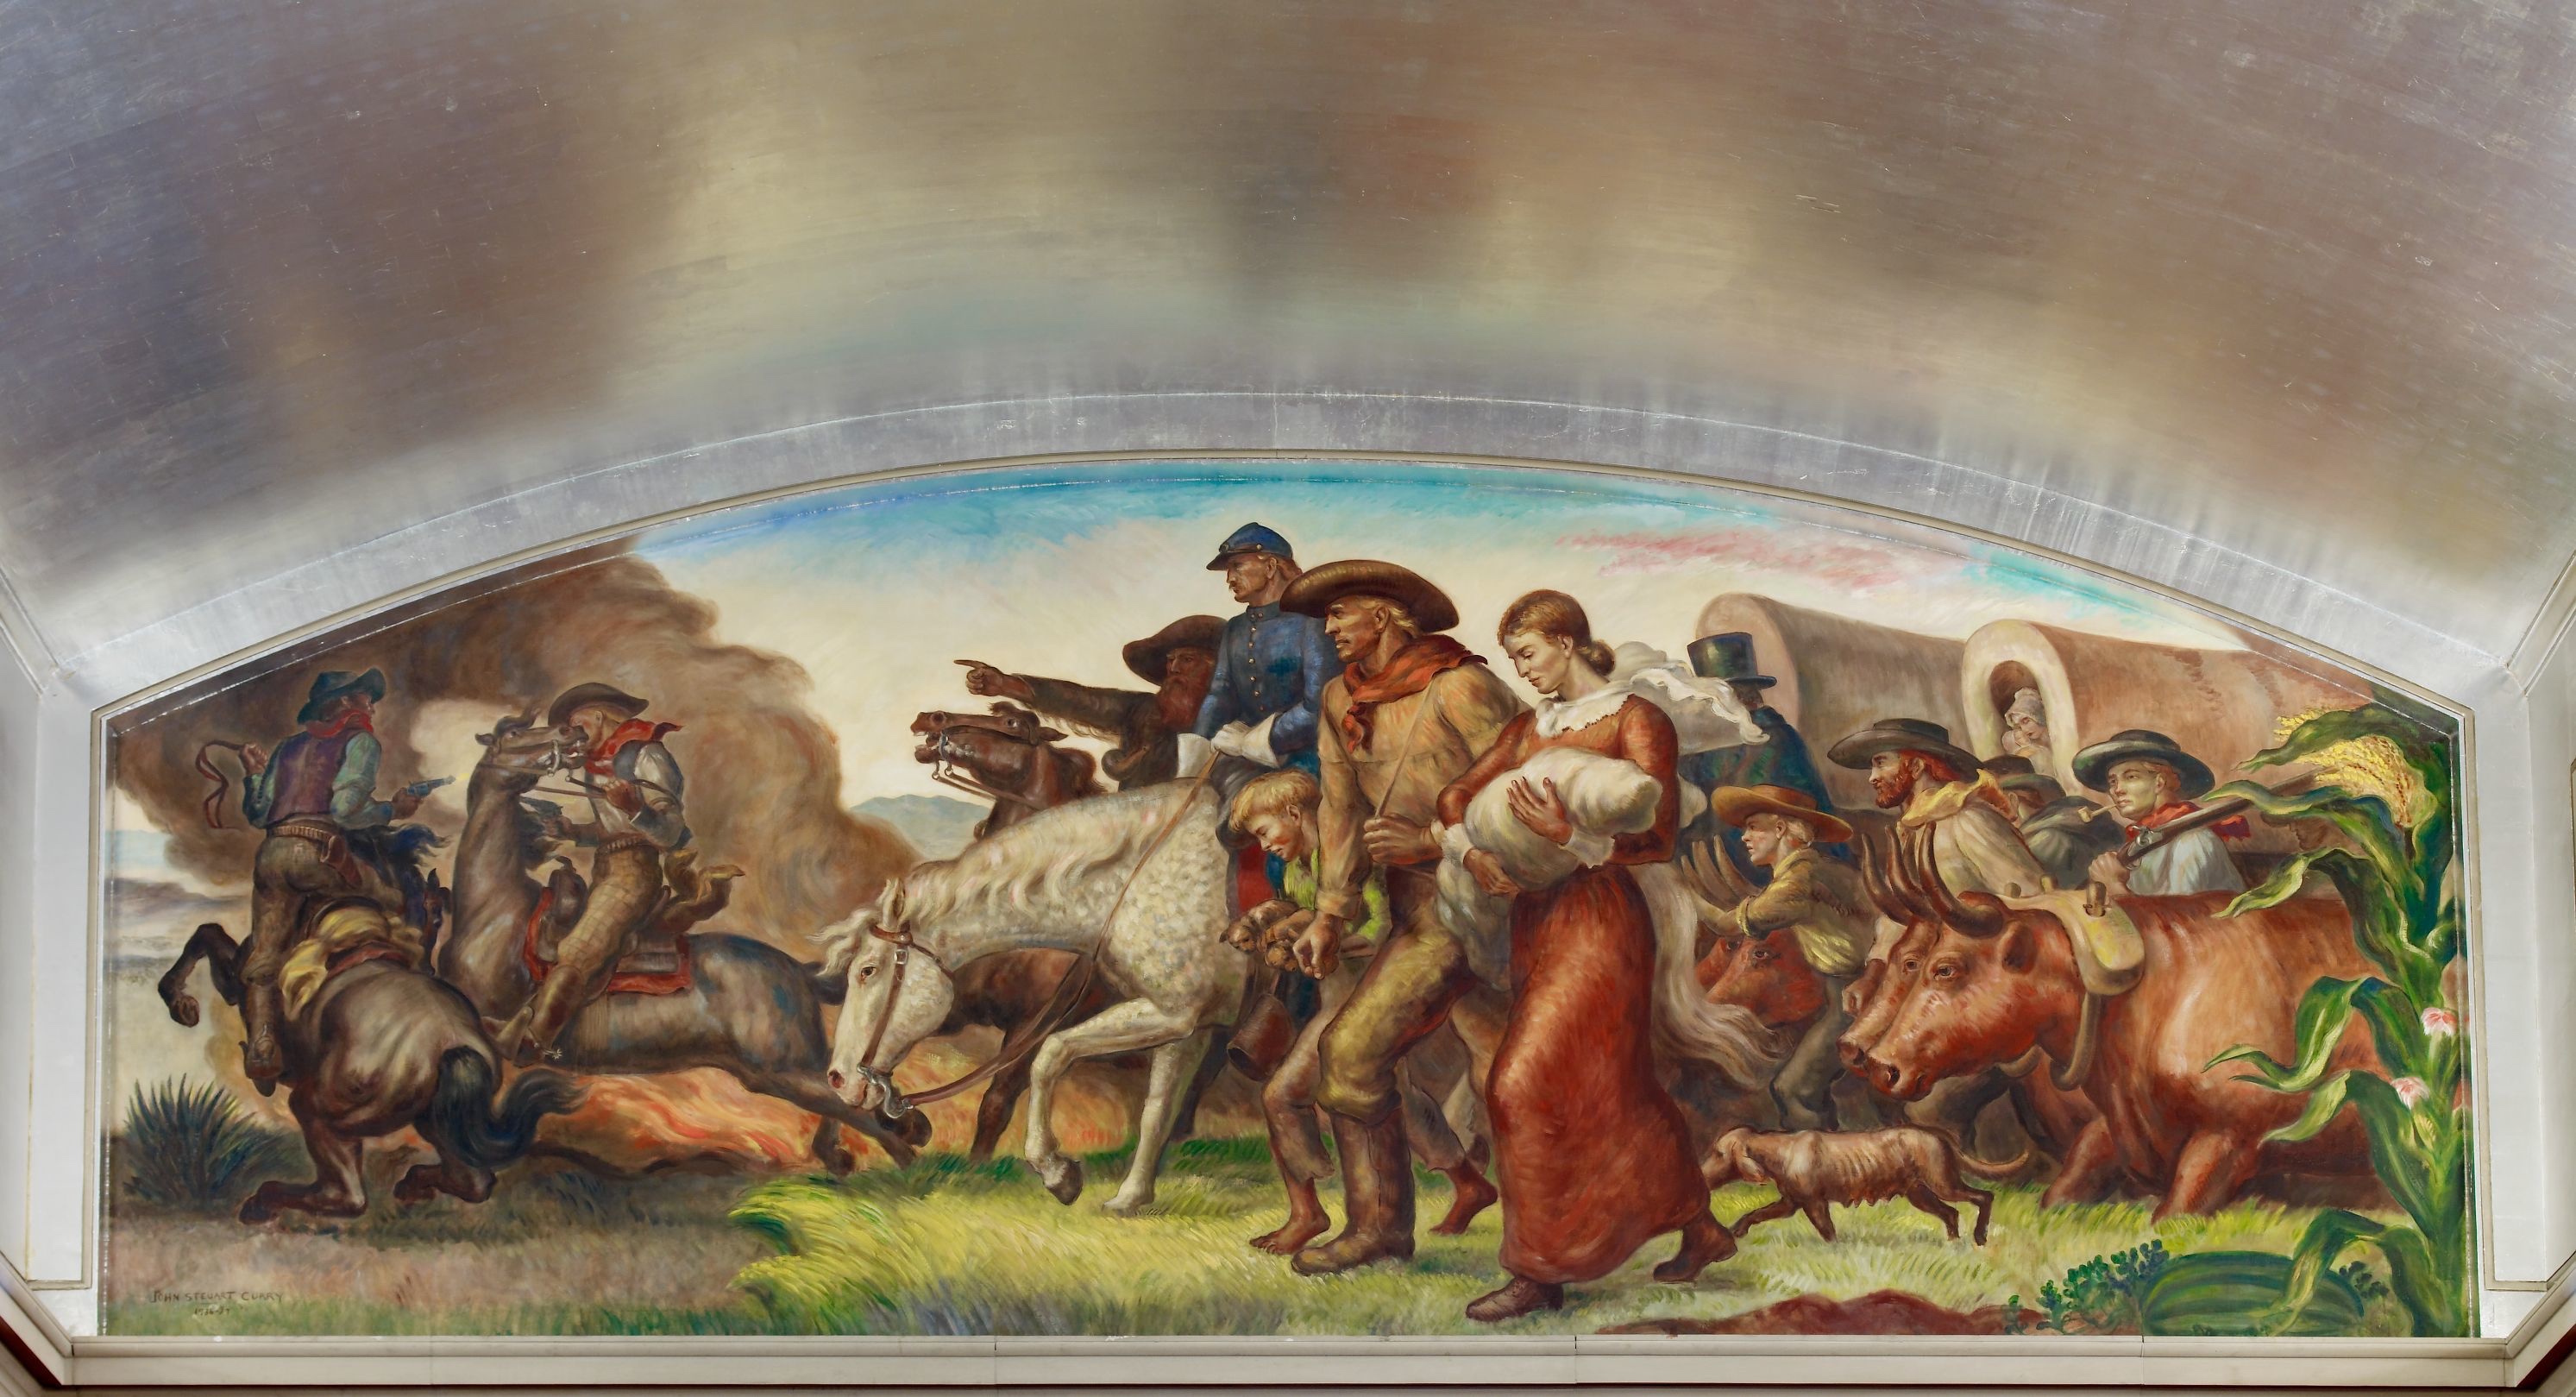 Justice of the Pains: The Movement Westward mural by John Steuart Curry.